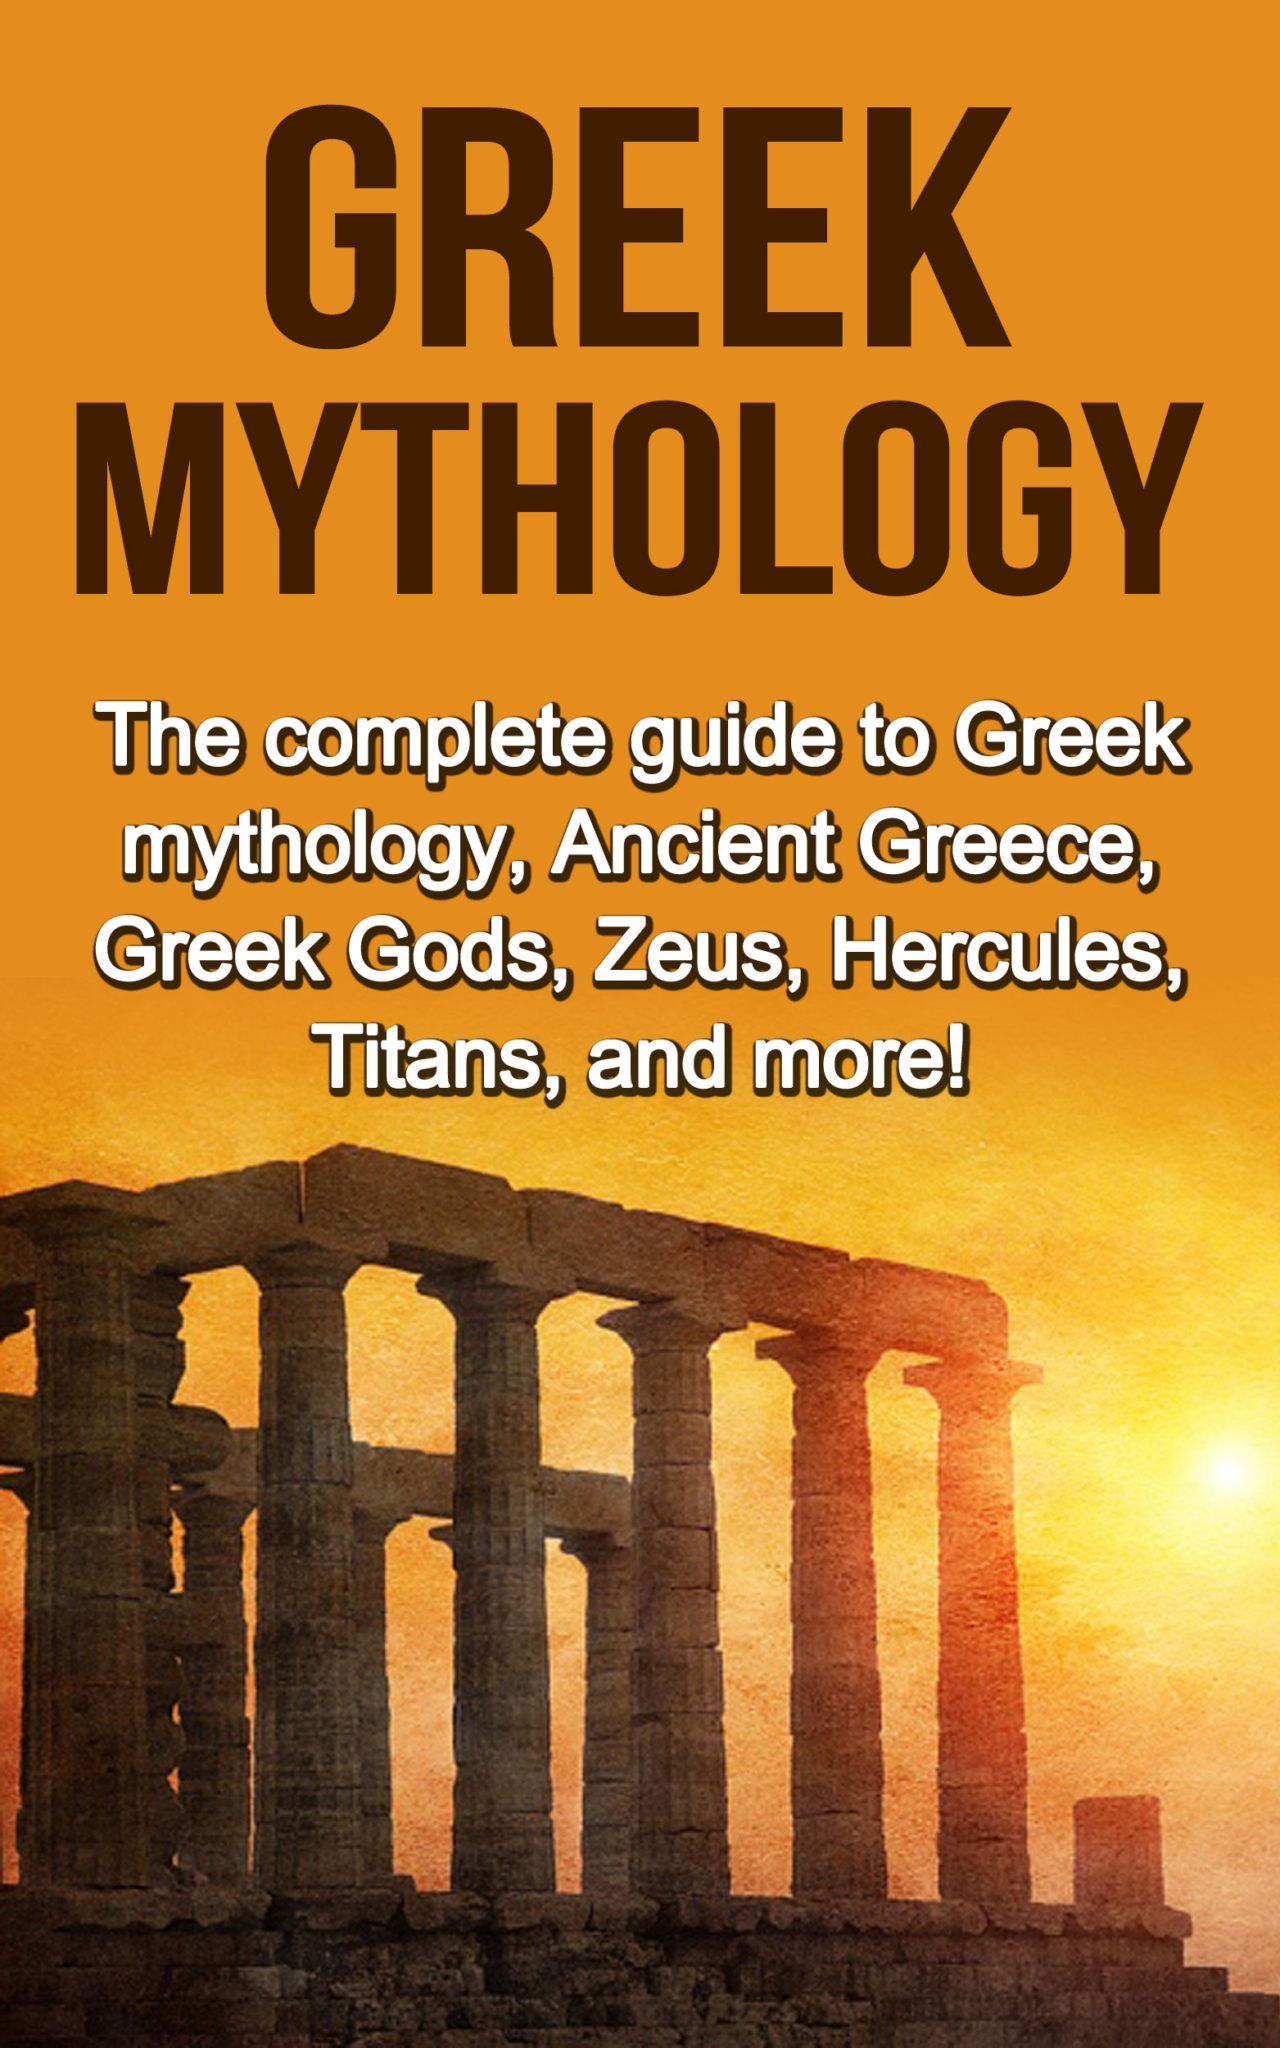 Greek Mythology: The complete guide to Greek Mythology, Ancient Greece, Greek Gods, Zeus, Hercules, Titans, and more! by Nick Plesiotis